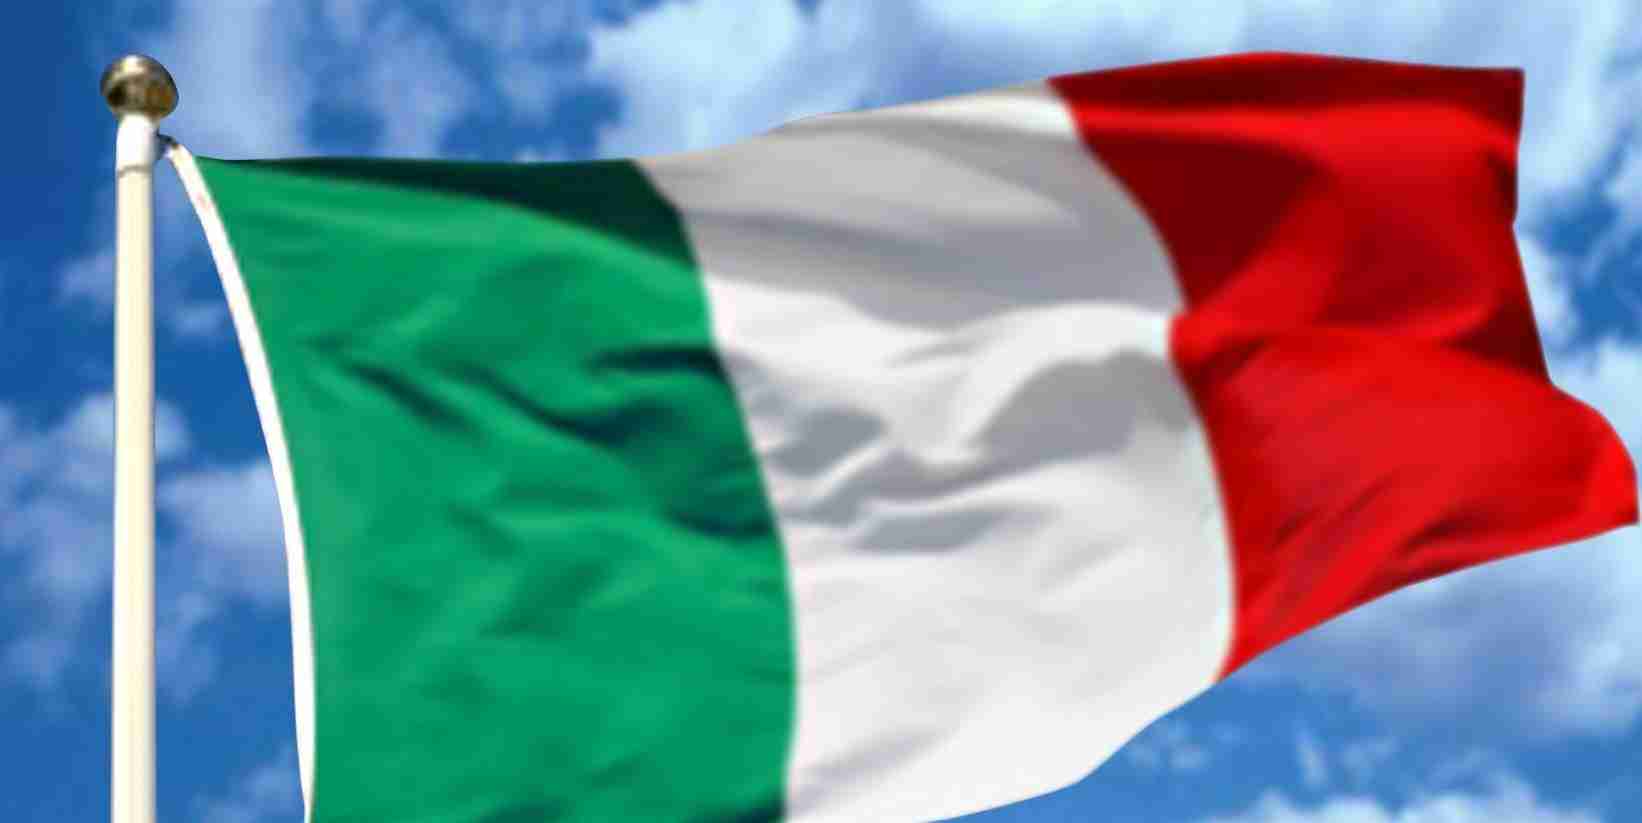 North Italy Brutalized By Heat, Is South Italy the New North Italy, Rome Government Collapses, Maybe Old Popey Will Help - Nah - Focus On The Optimistic Opportunities and Positives - No Worries - Italy Will Be Fine